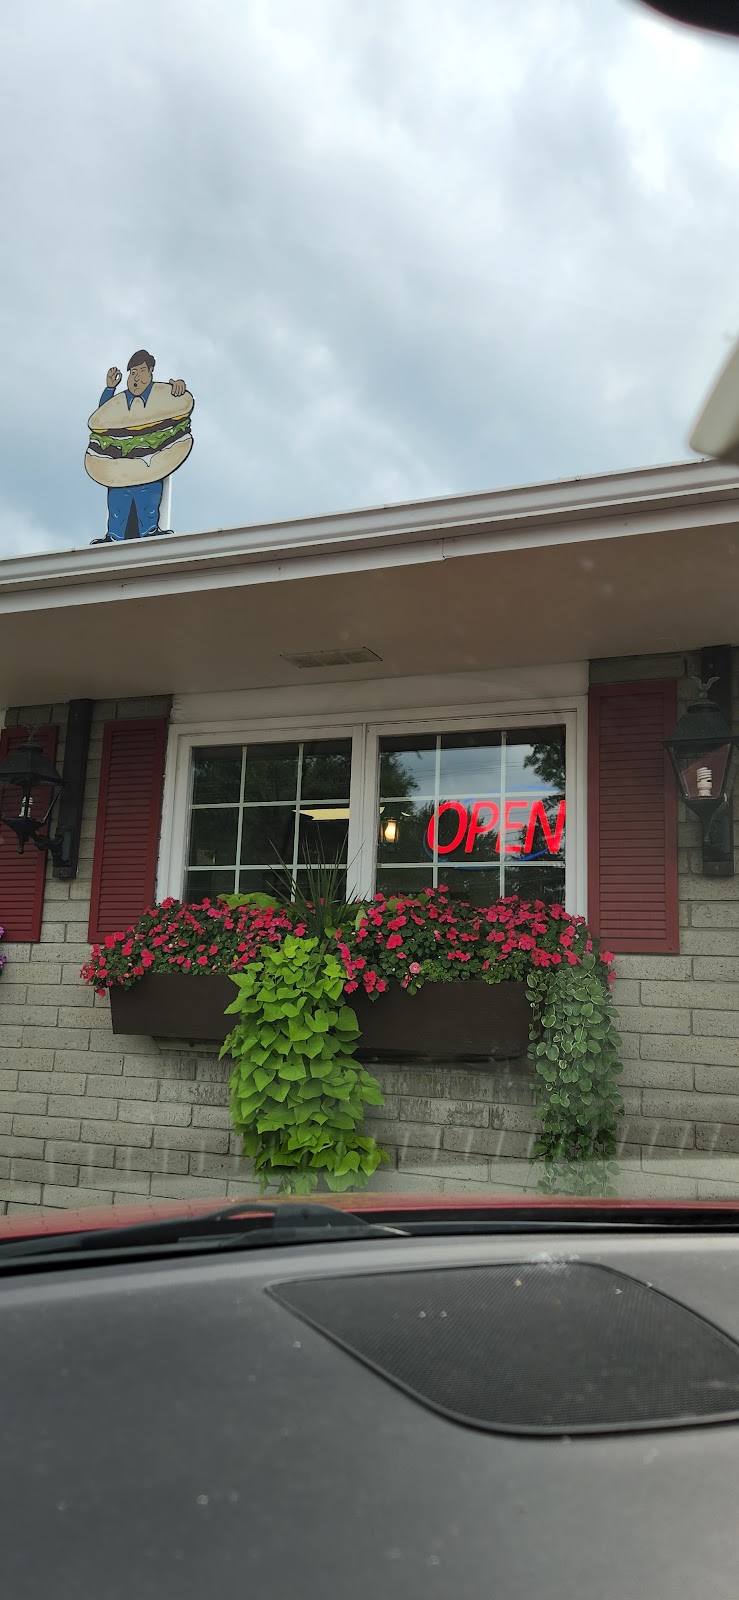 Midway Oh Boy Restaurant | 6620 Lake Ave, Elyria, OH 44035, USA | Phone: (440) 324-3711